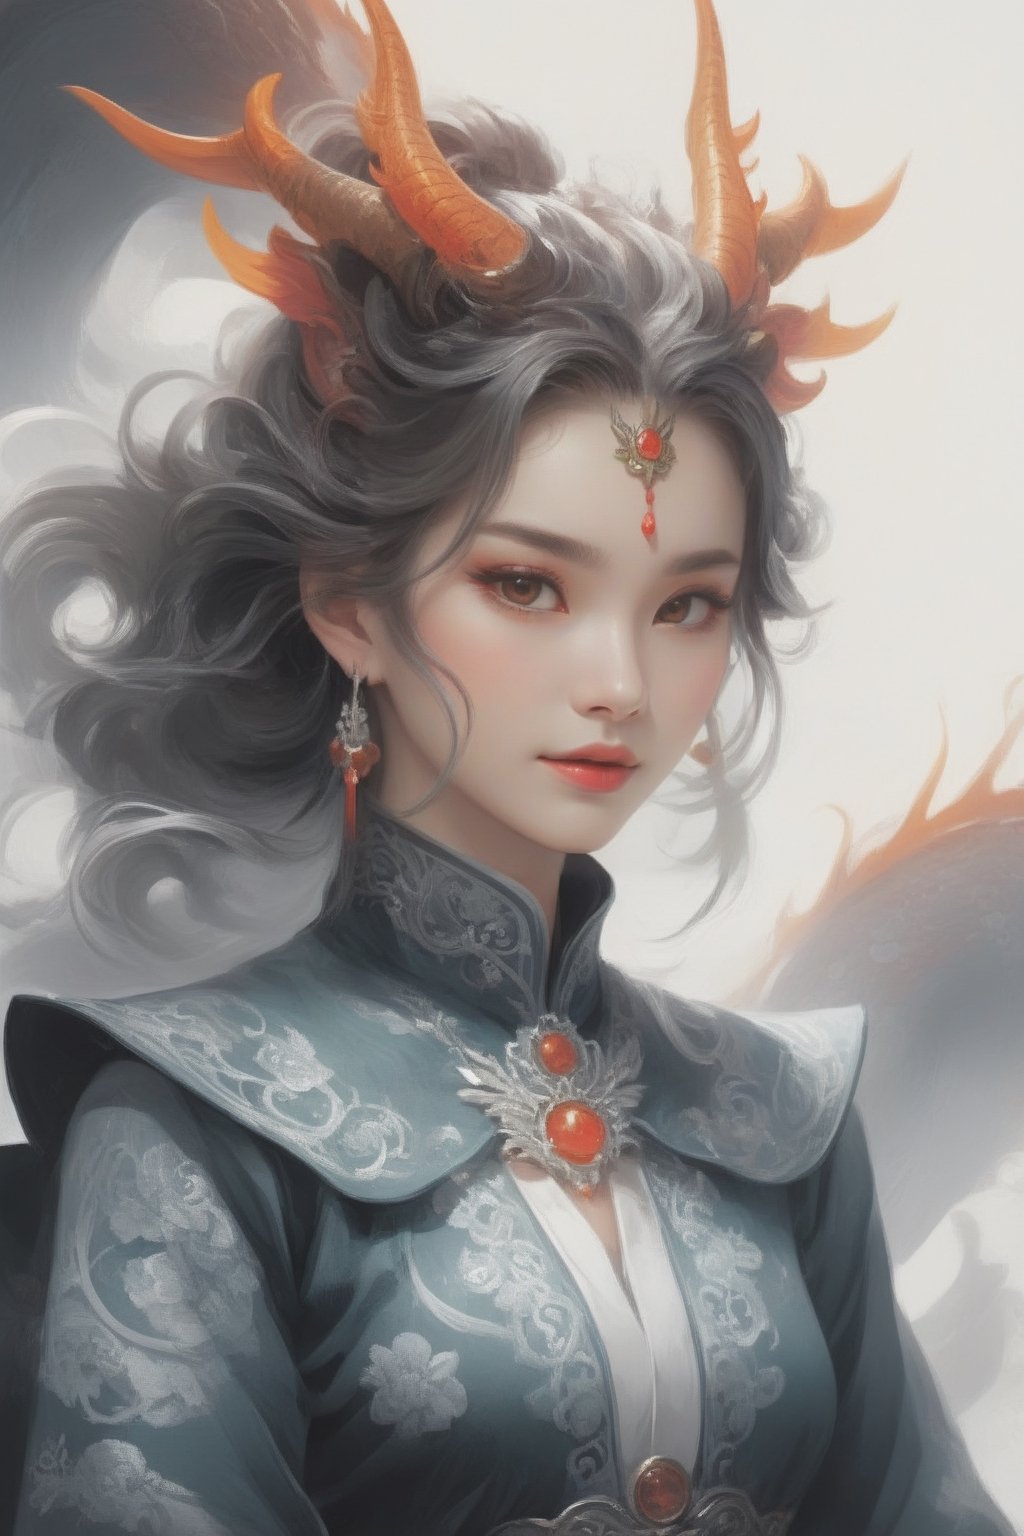 1 girl, (masterful), (long intricate horns:1.2),detailed and intricate, dragonyear, dragon-themed
,Glass Elements, looking_at_viewer,chinese girls,goth person,  sfw,  complex background,dragon-themed,dragonyear 